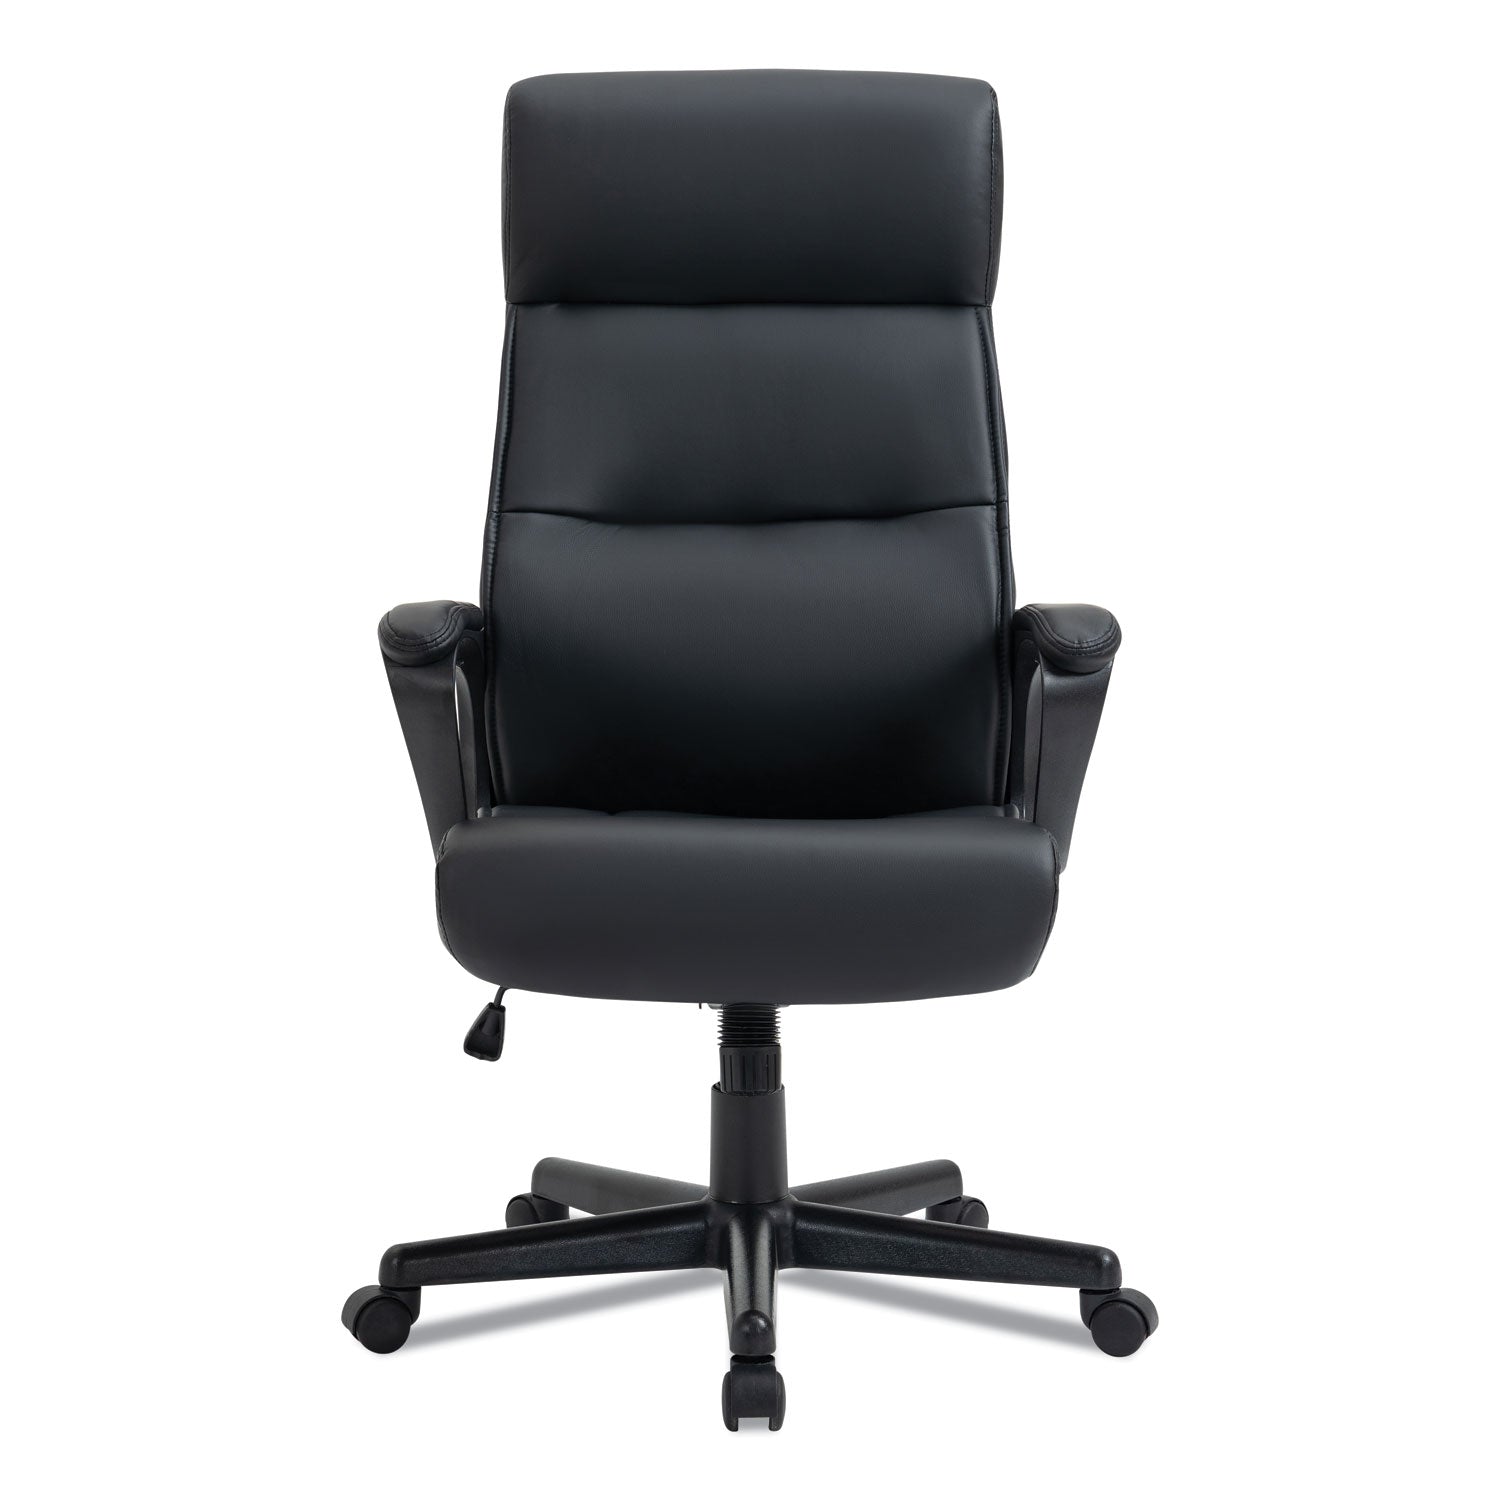 alera-oxnam-series-high-back-task-chair-supports-up-to-275-lbs-1756-to-2138-seat-height-black-seat-back-black-base_aleon41b19 - 2